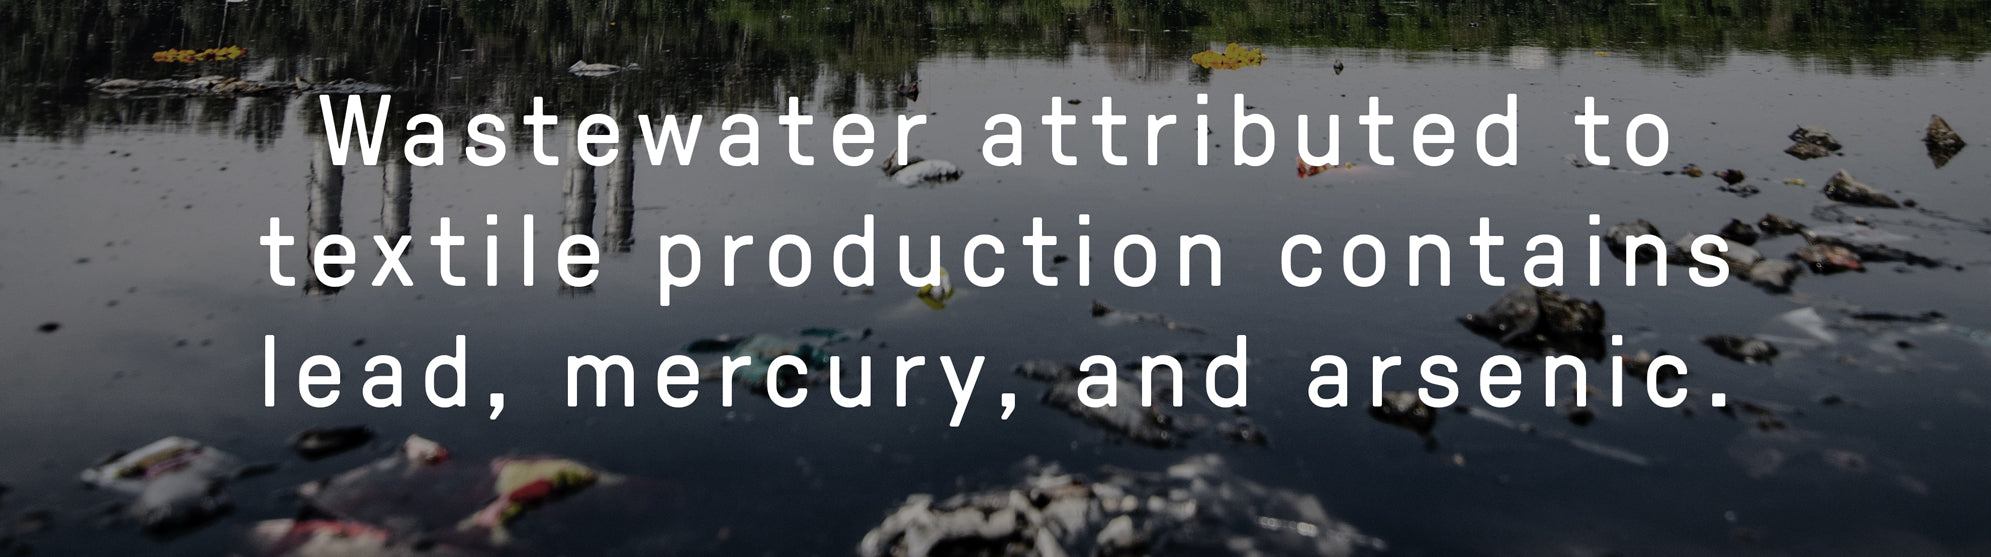 Wastewater attributed to textile production contains lead, mercury, and arsenic.